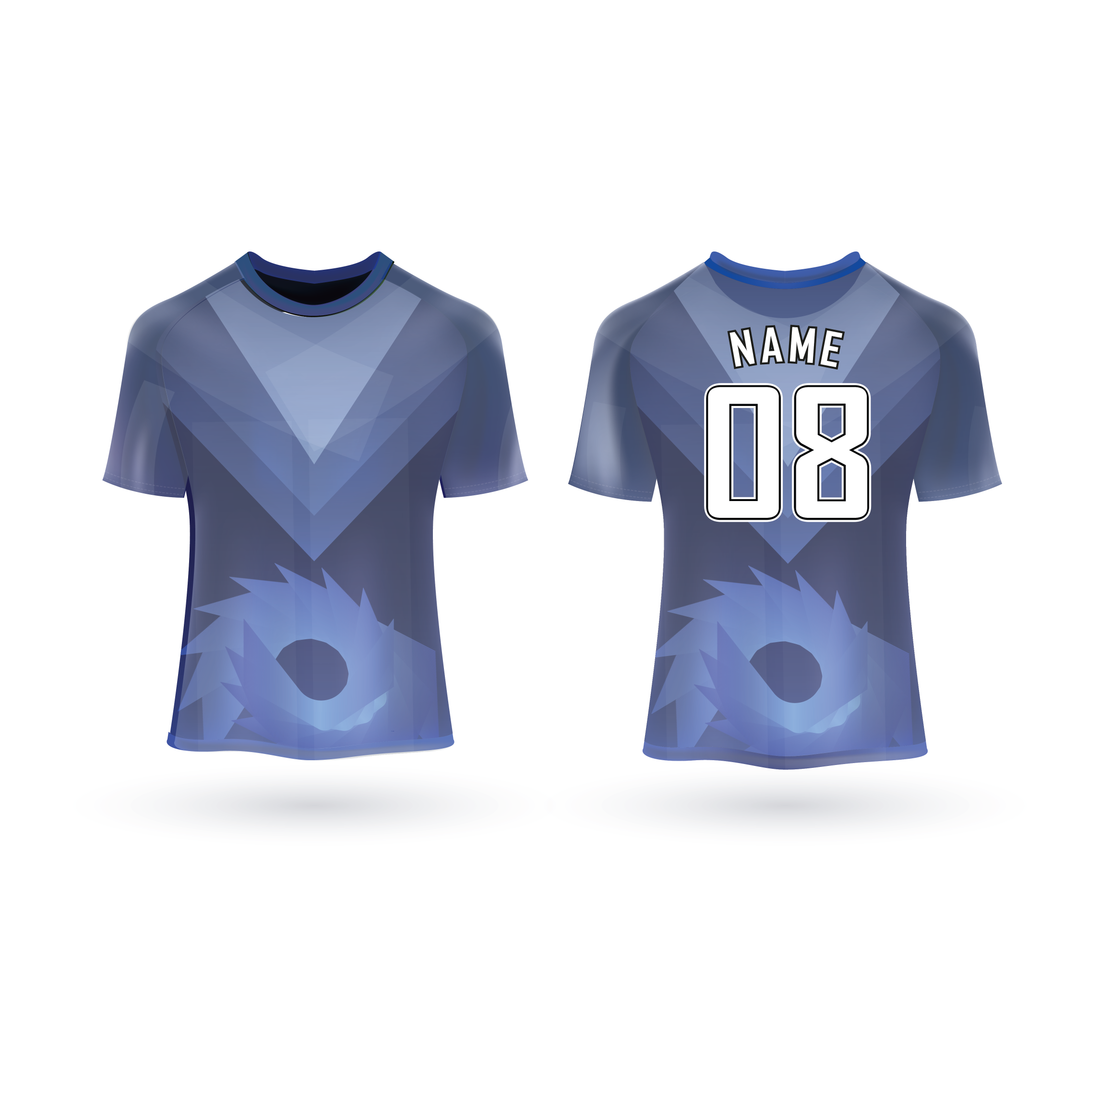 NEXT PRINT All Over Printed Customized Sublimation T-Shirt Unisex Sports Jersey Player Name & Number, Team Name NP50000286